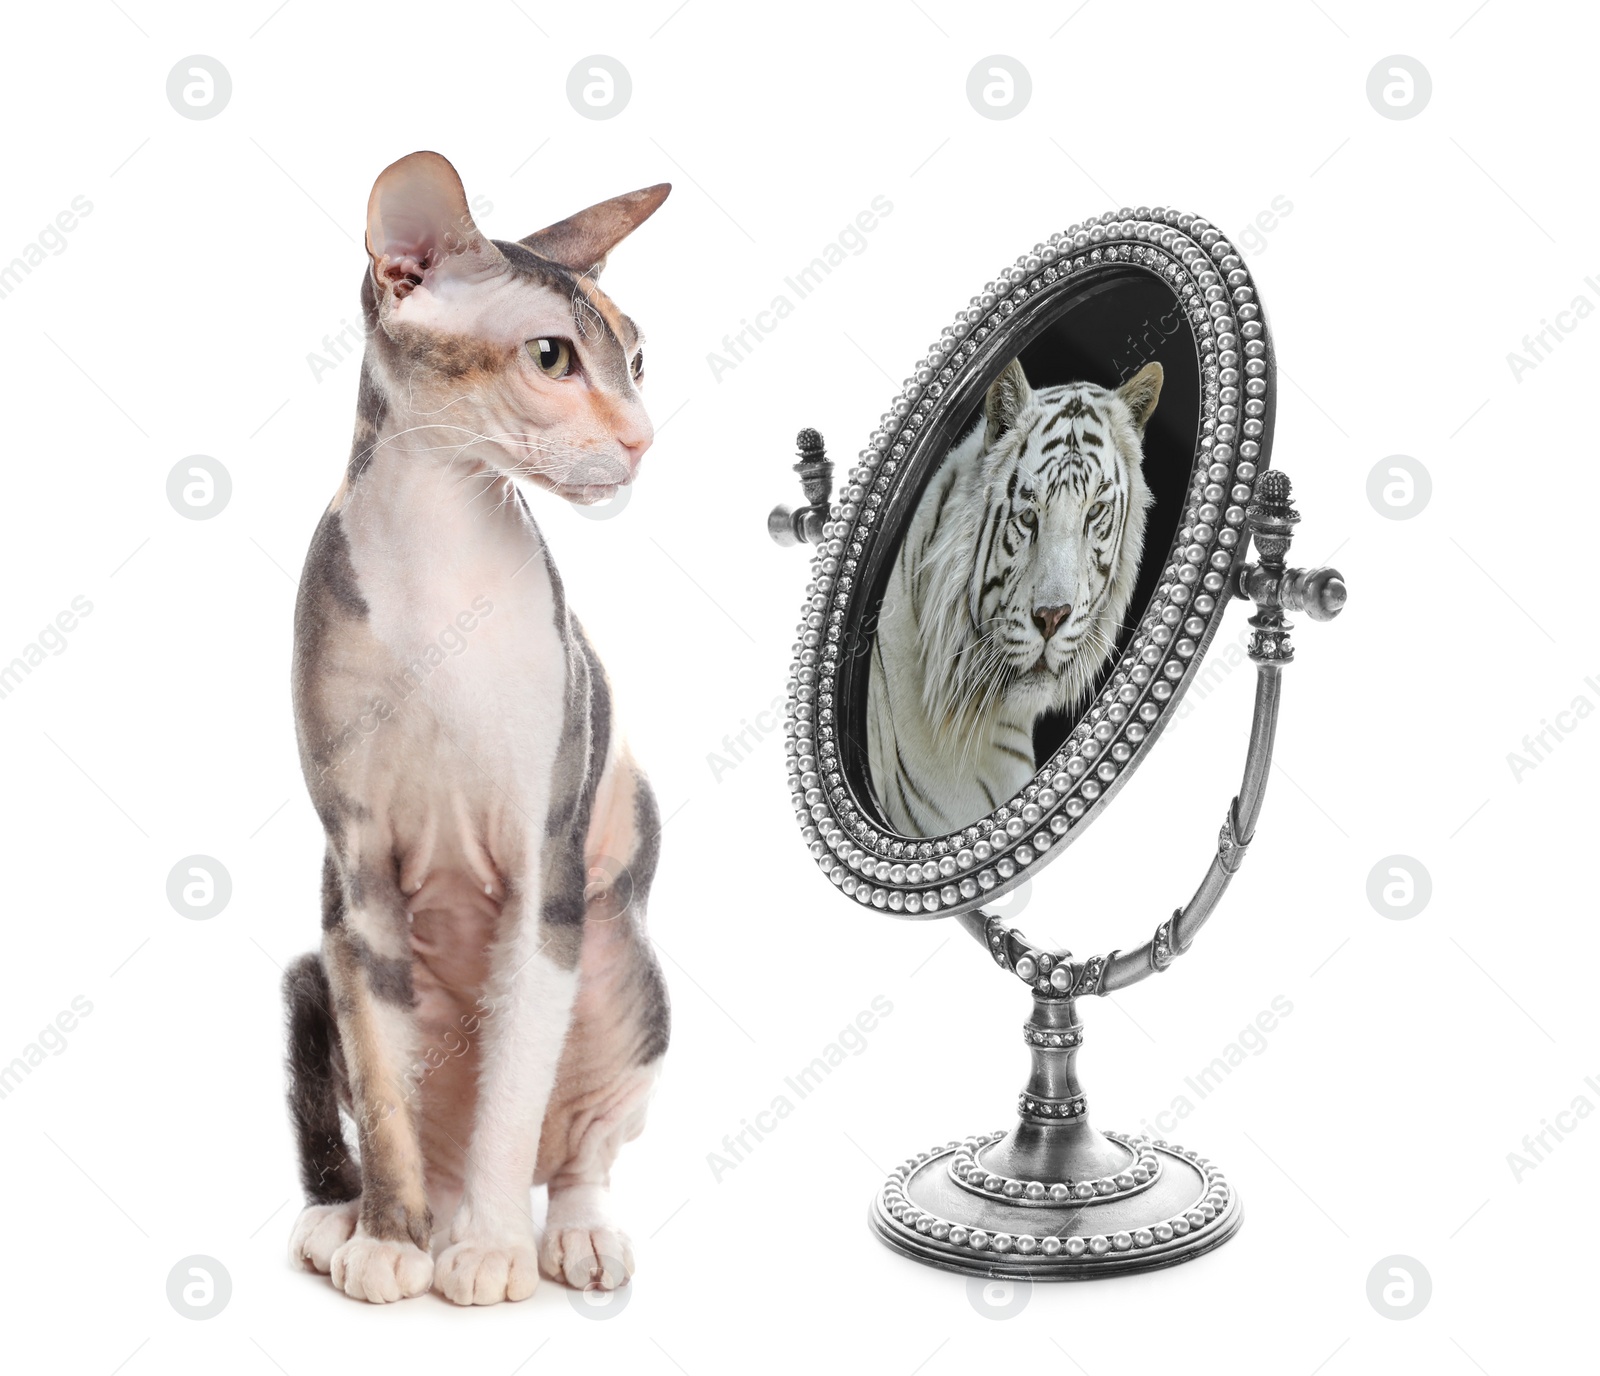 Image of Cute cat looks like tiger into reflection of mirror on white background